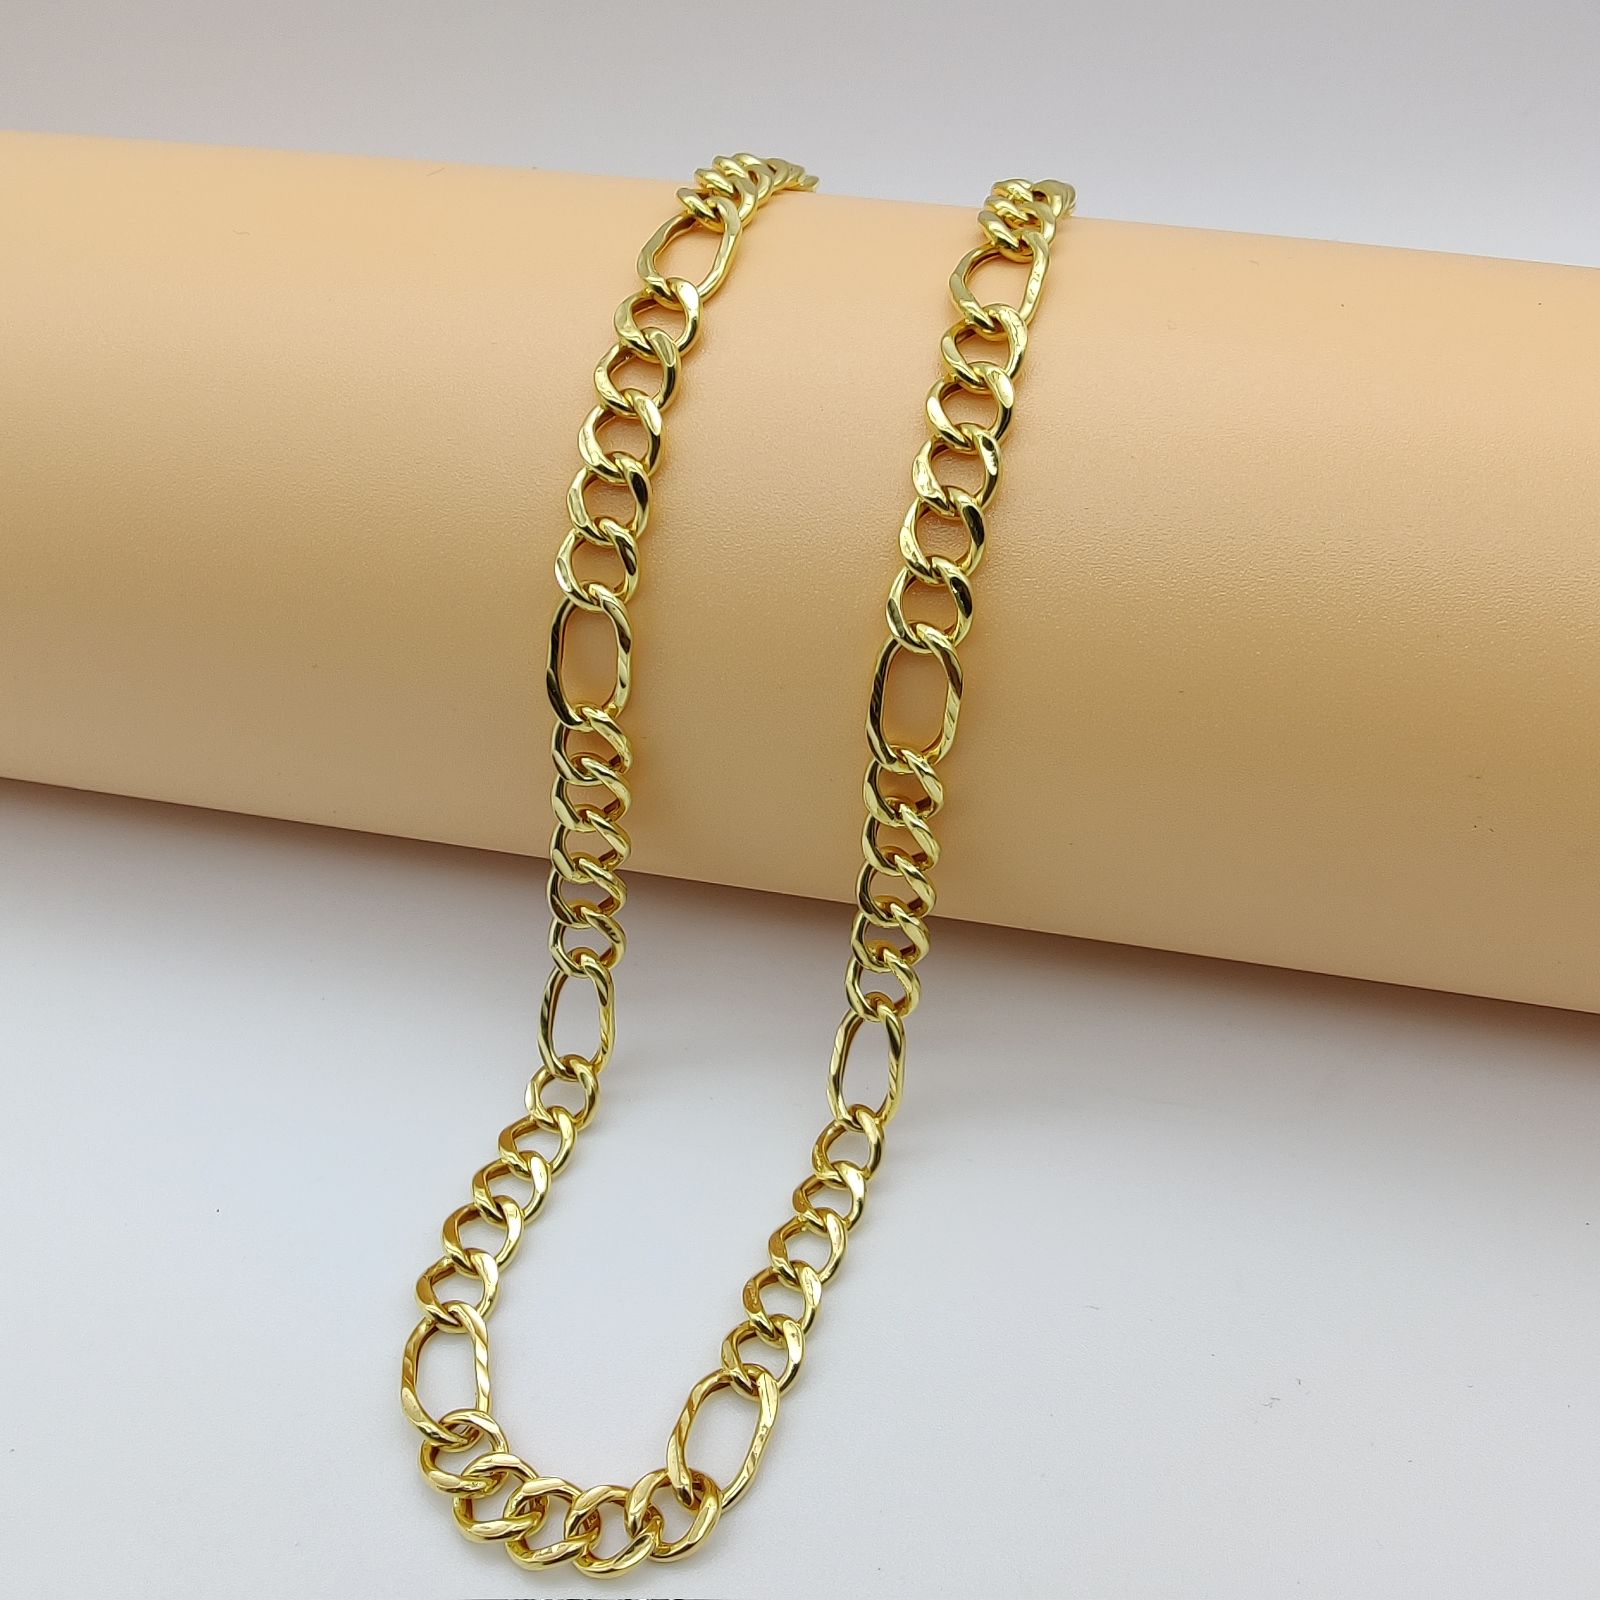 rich & famous Elegant Sachin Tendulkar Design Gold Fashion Alloy Chain  Price in India - Buy rich & famous Elegant Sachin Tendulkar Design Gold  Fashion Alloy Chain Online at Best Prices in